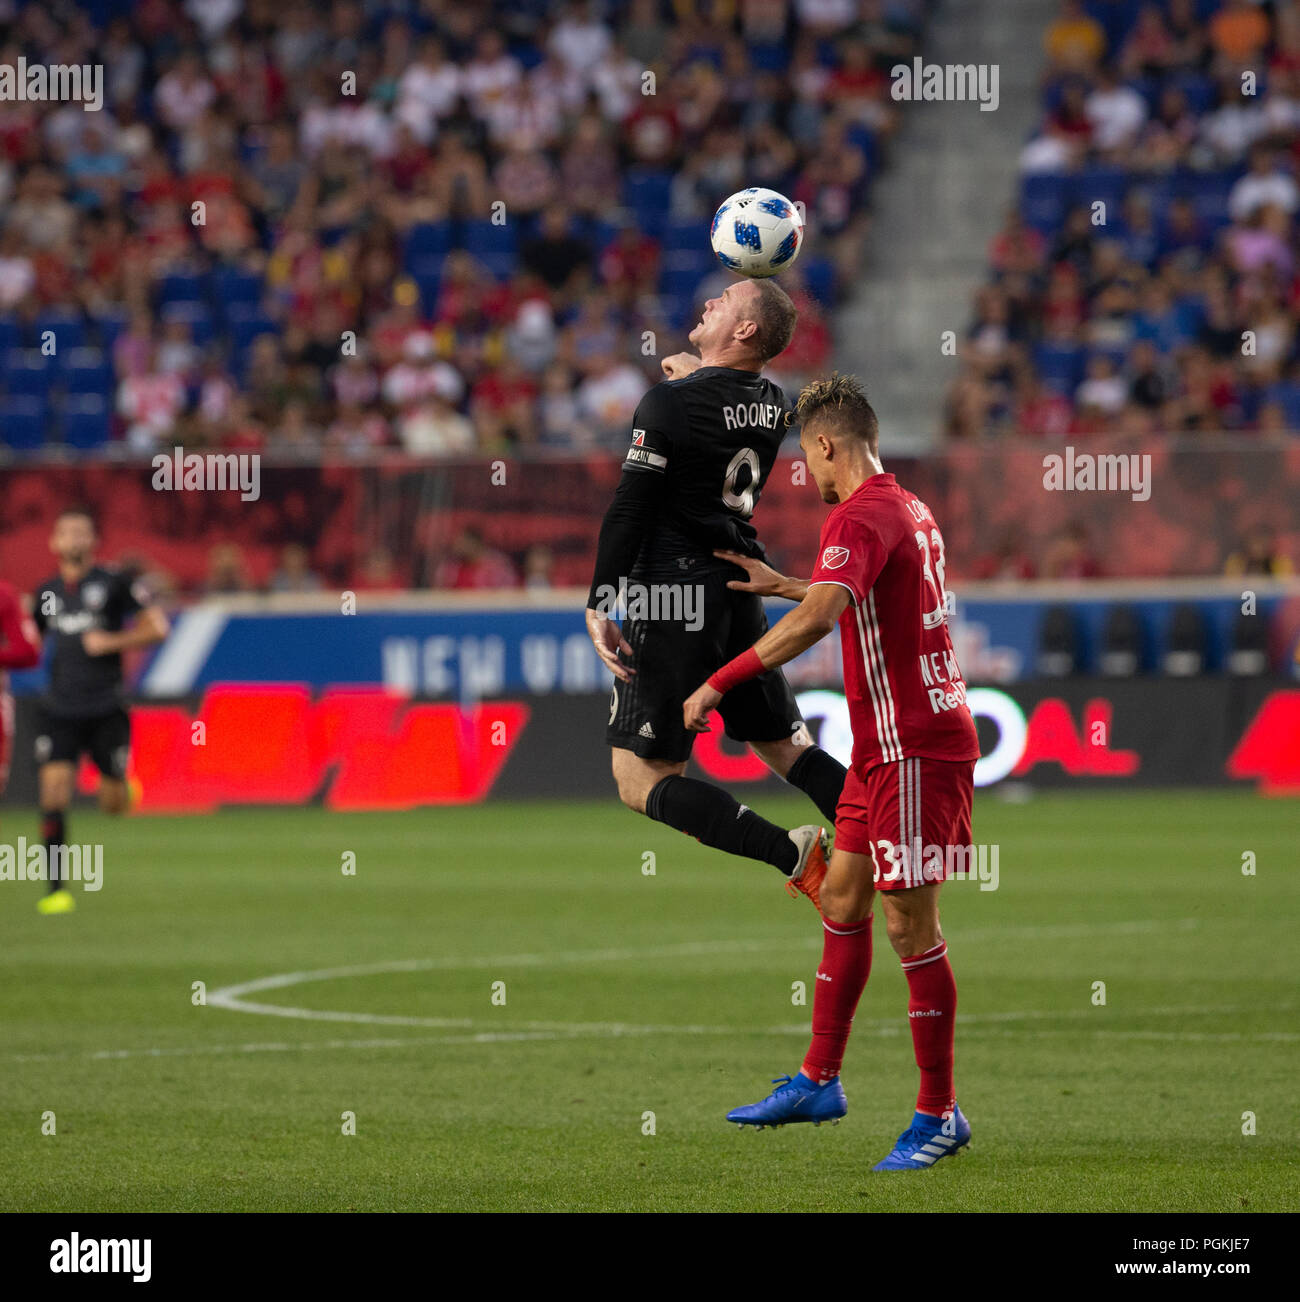 Harrison, United States. 26th Aug, 2018. Wayne Rooney (9) of D.C. United controls ball during regular MLS game against Red Bulls at Red Bull Arena Red Bulls won 1 - 0 Credit: Lev Radin/Pacific Press/Alamy Live News Stock Photo